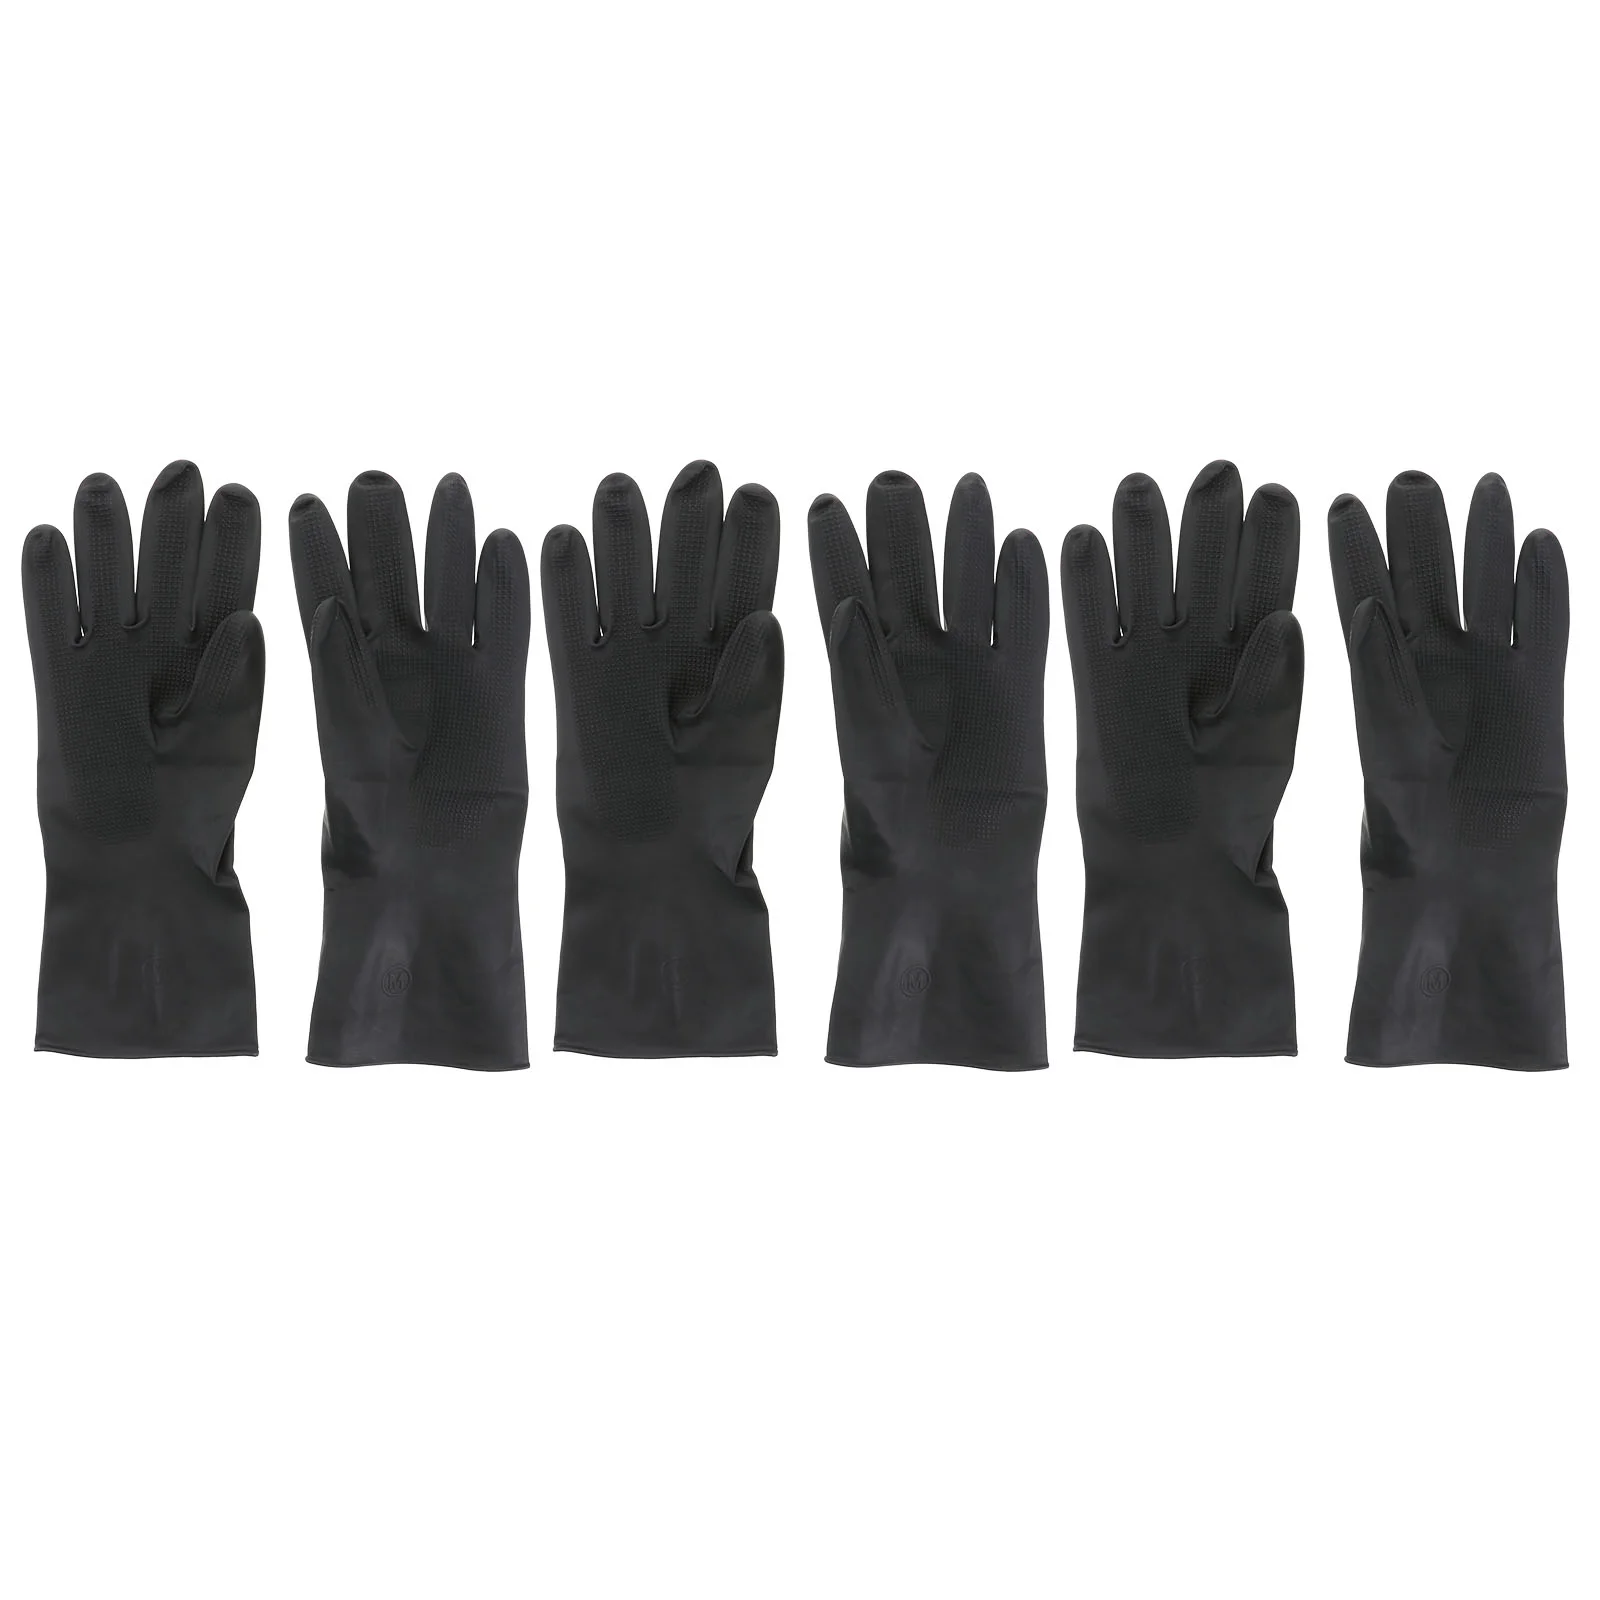 

Gloves Hair Coloring Dying Salon Barber Reusable Dye Rubber Suppliescolor Black Styling Hand Accessories Menchemical